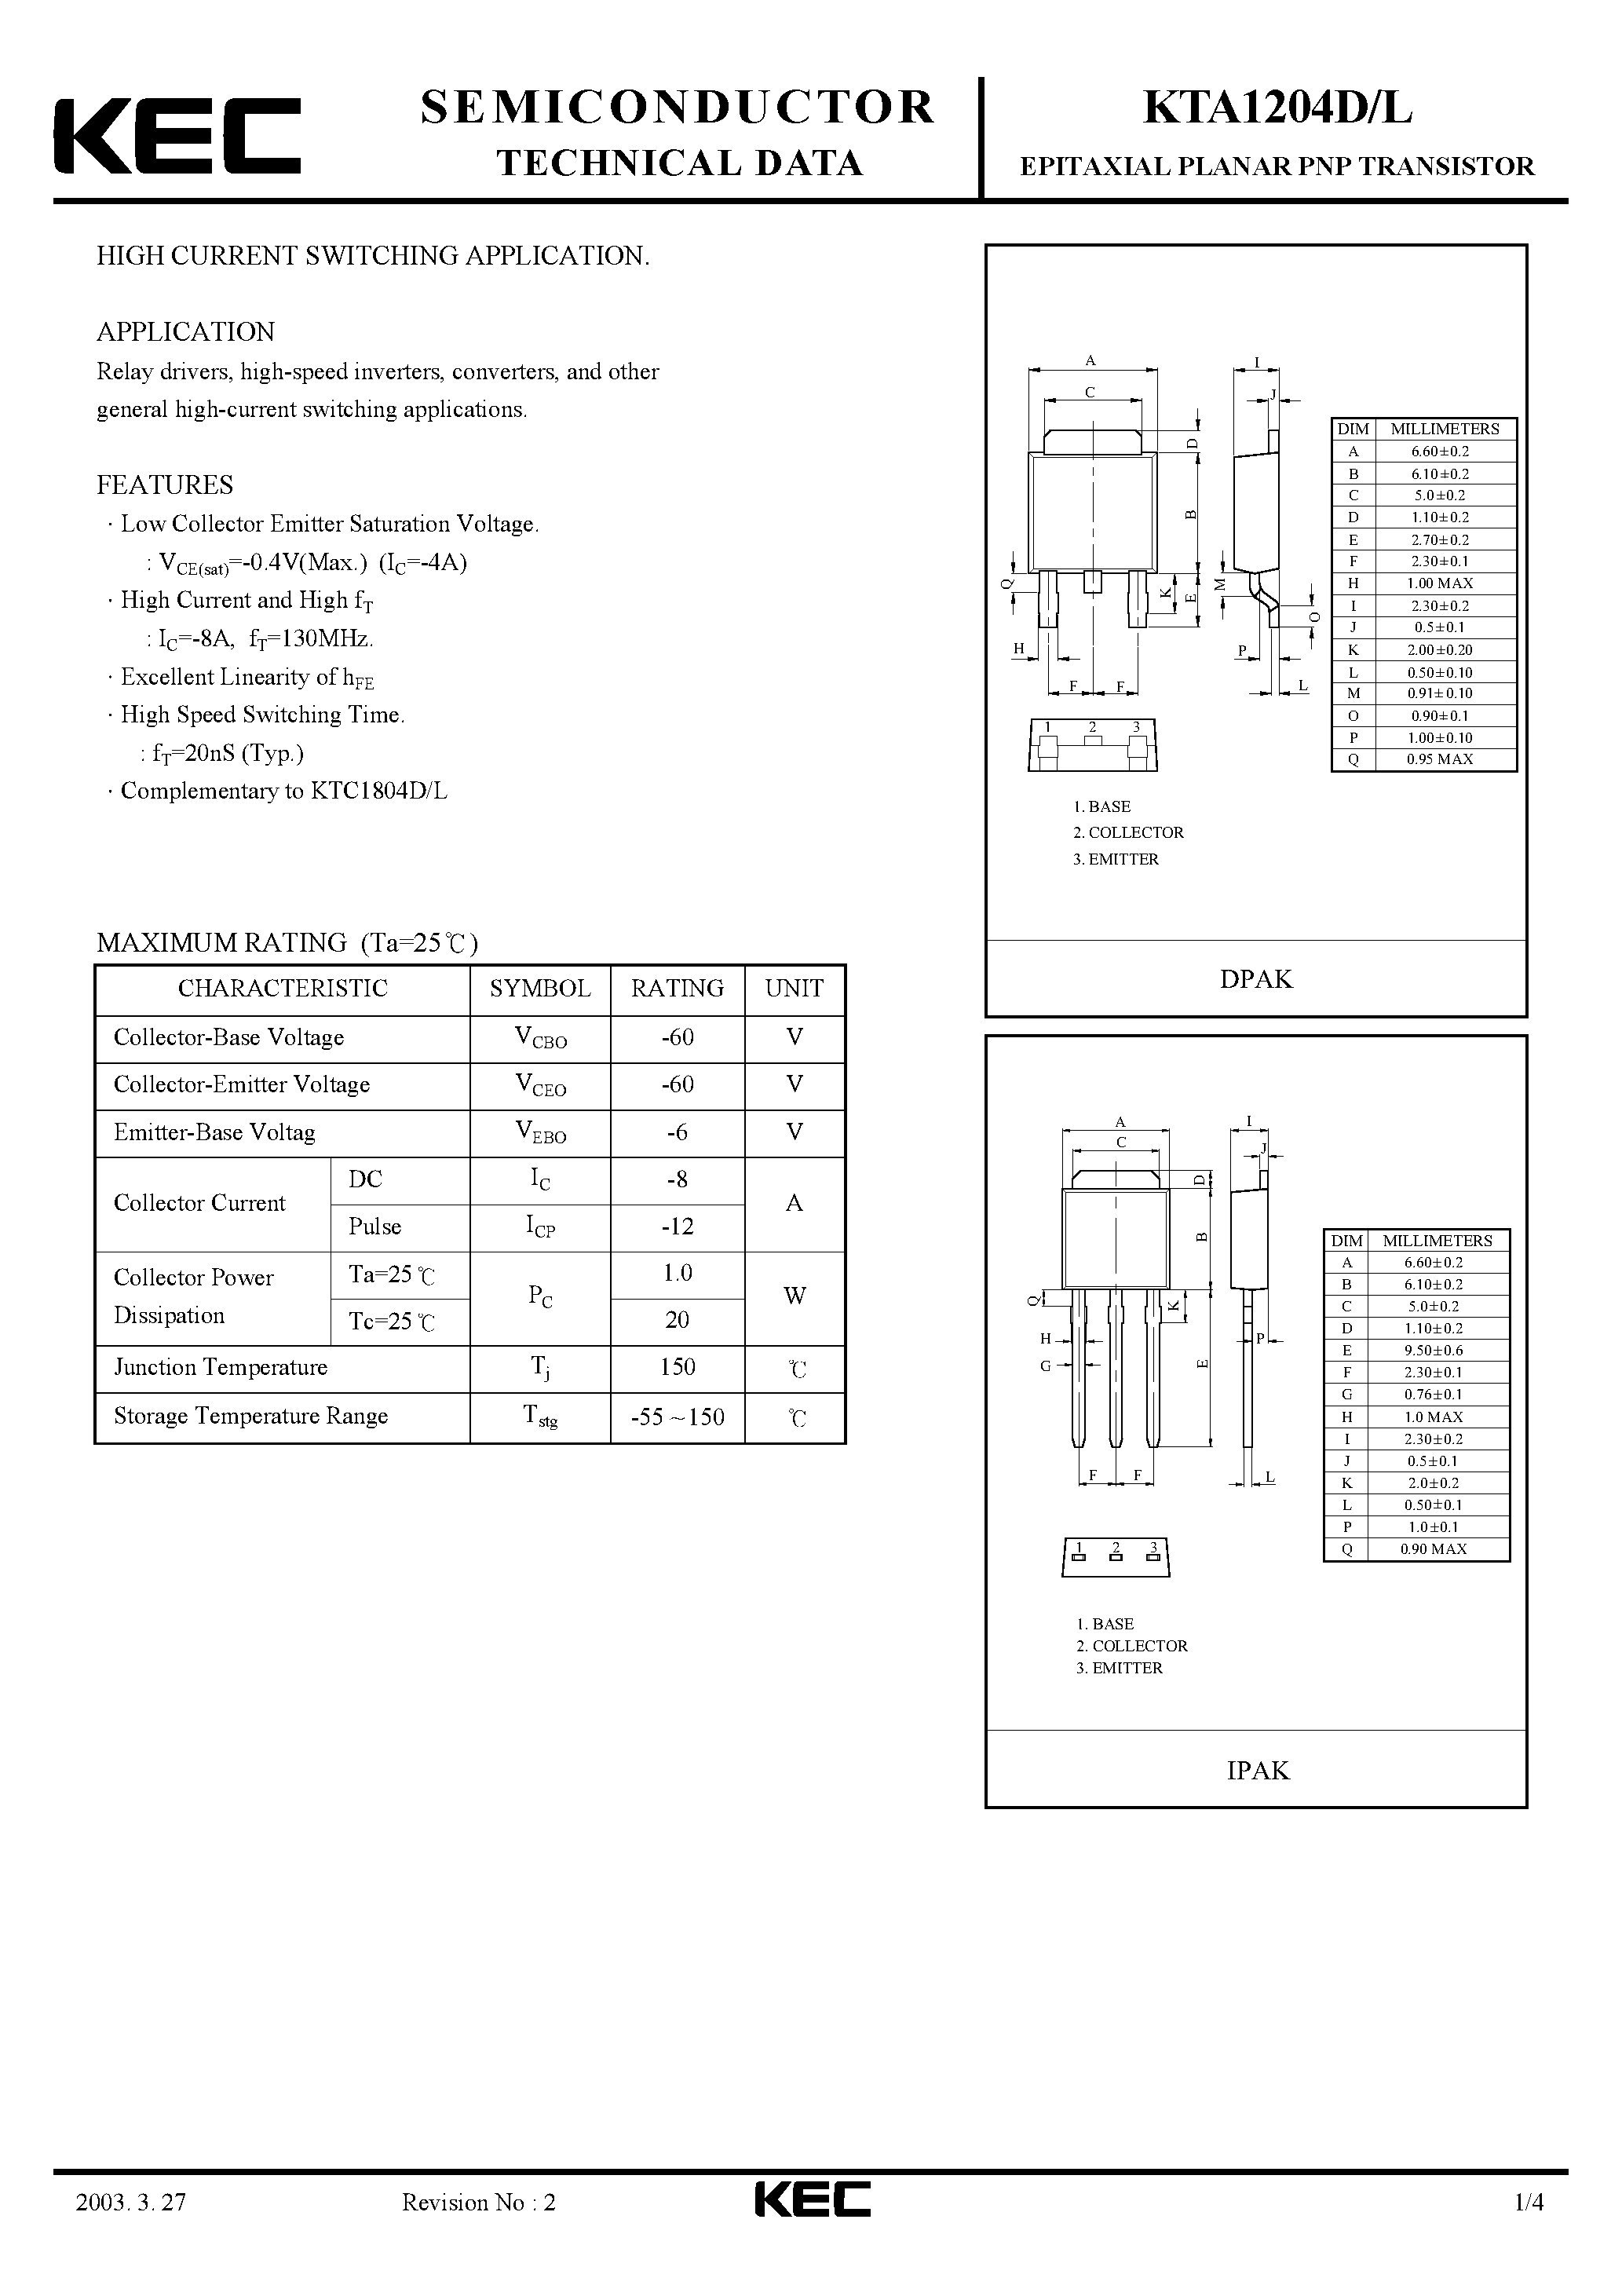 Даташит KTA1204 - EPITAXIAL PLANAR PNP TRANSISTOR (HIGH CURRENT SWITCHING) страница 1